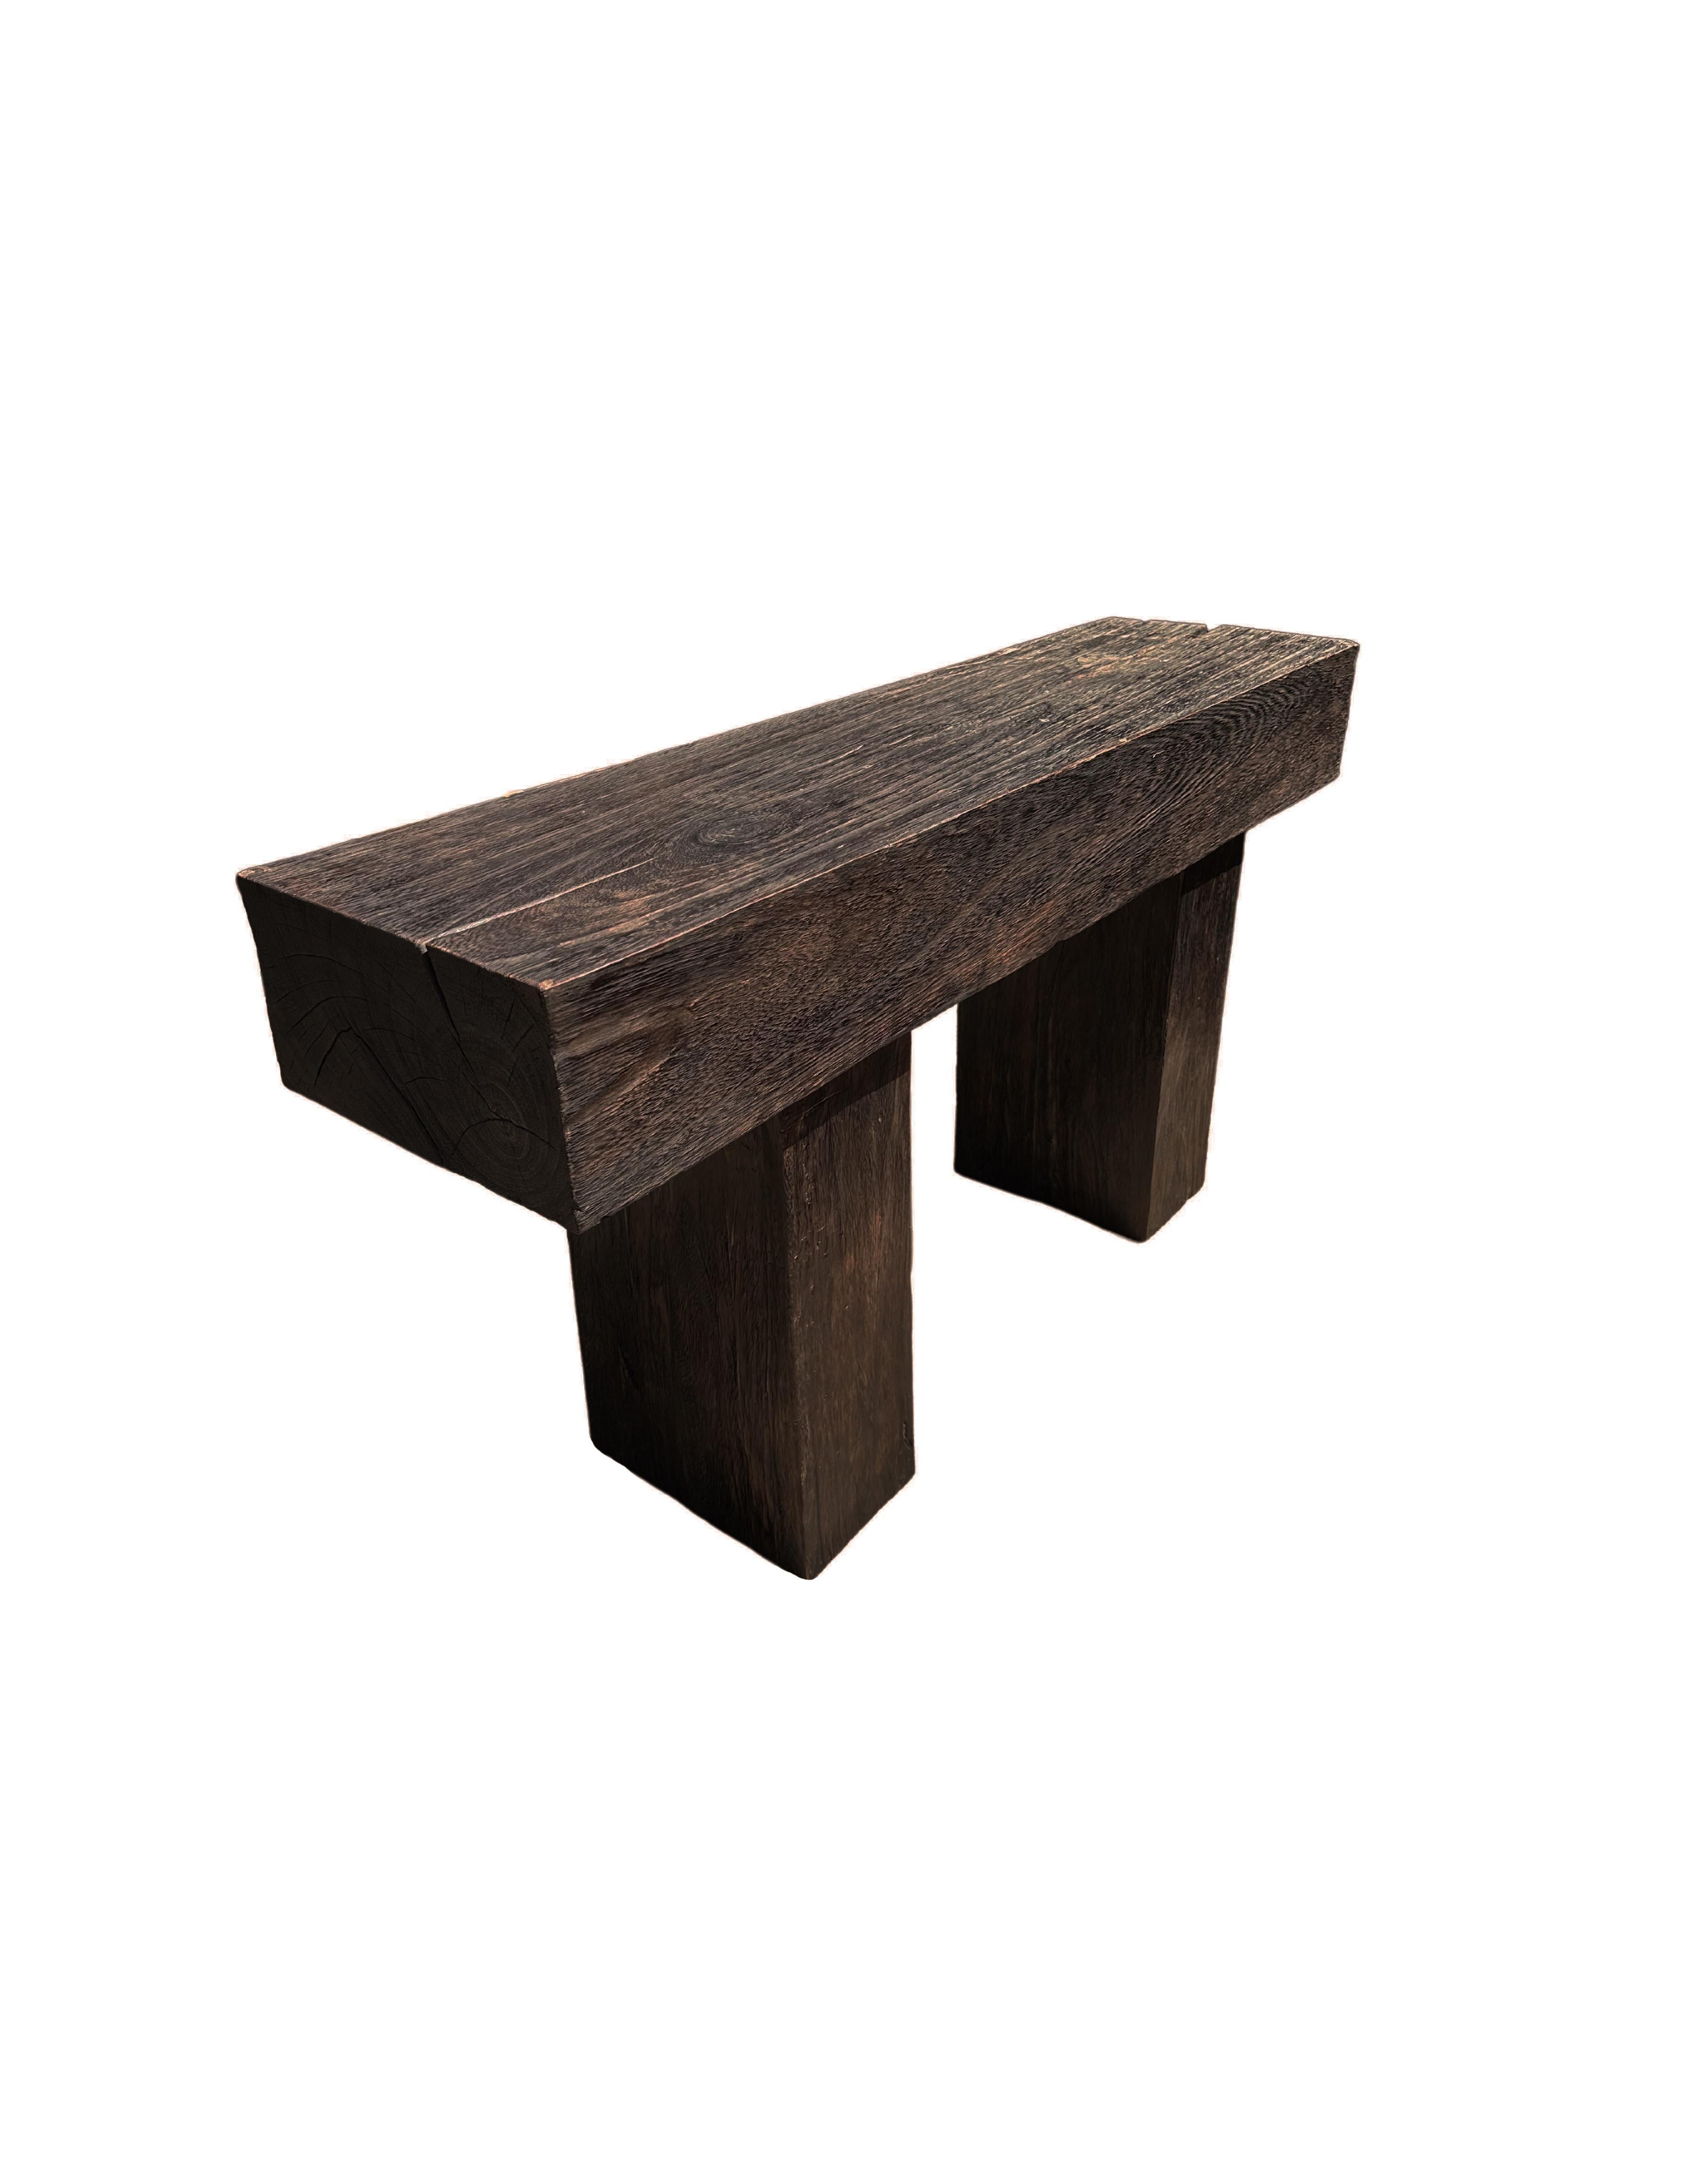 A sculptural mango wood console table crafted from solid mango wood. The table top sits atop two solid,  legs. A wonderfully minimalist object. The subtle wood textures present on all sides adds to its charm. To achieve its unique pigment the wood